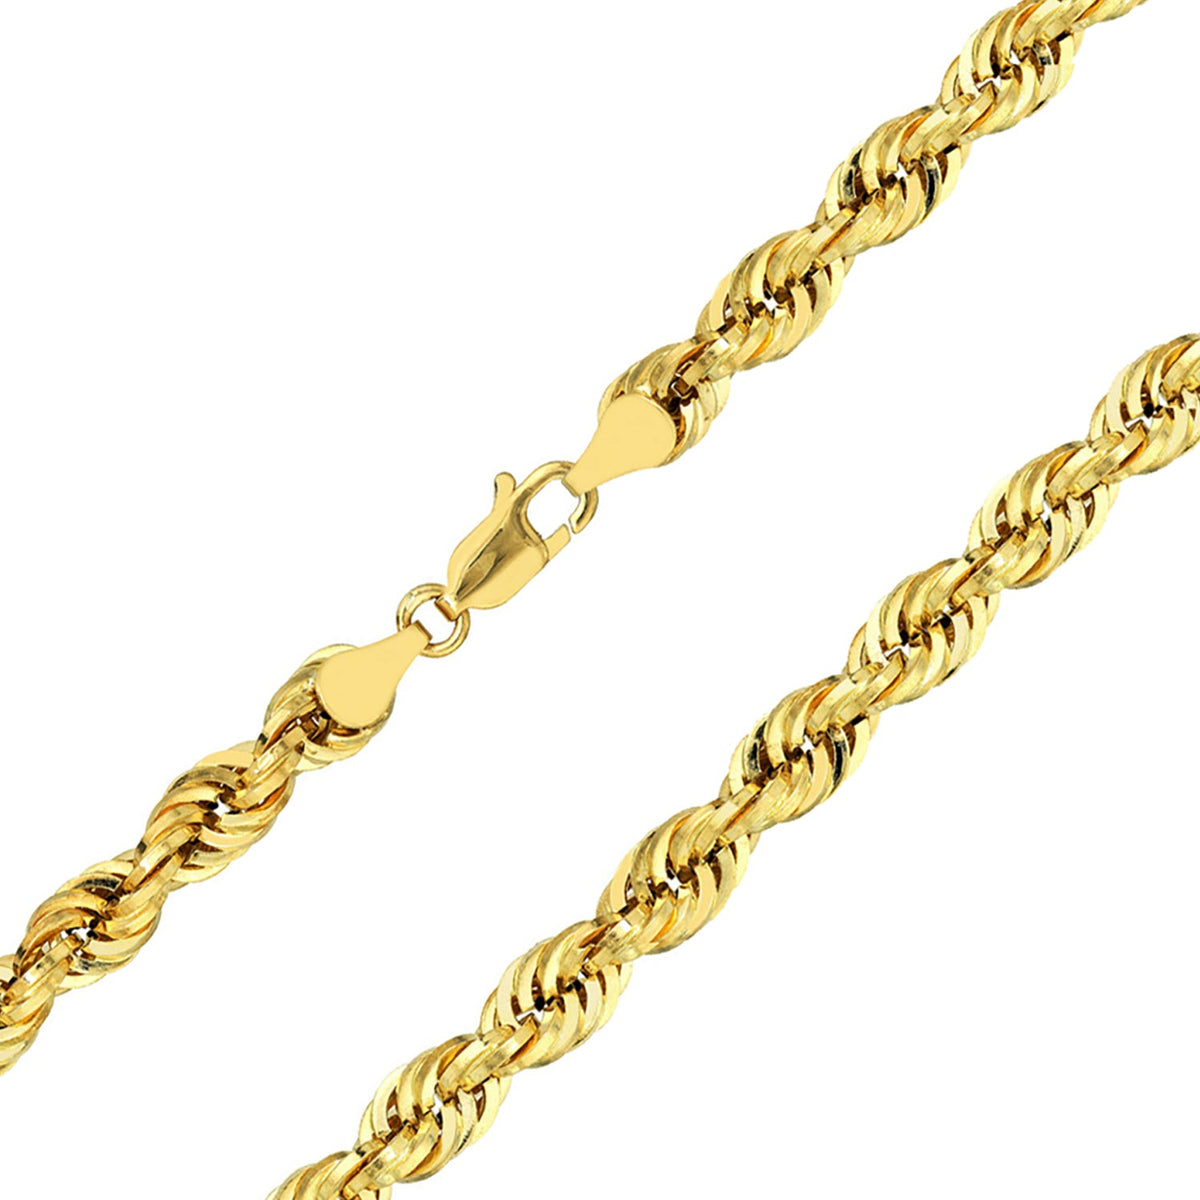 Solid 14k Yellow Gold 8mm Rope Chain Necklace with Lobster Lock - Diamond-Cut